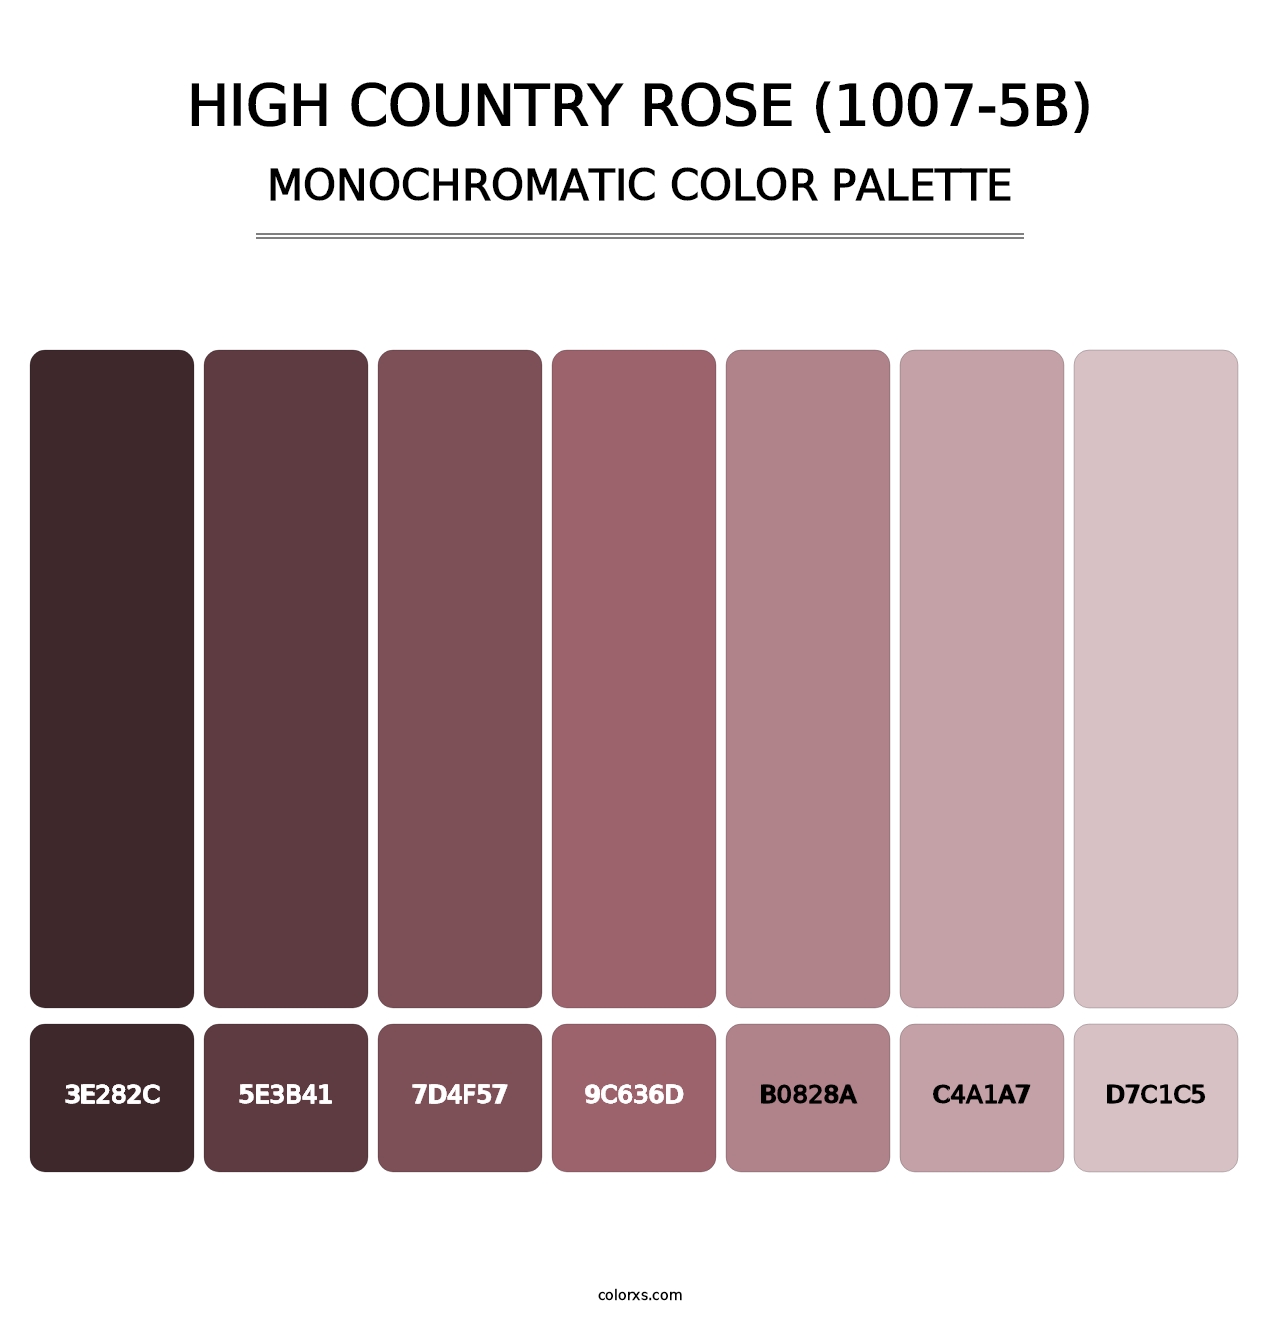 High Country Rose (1007-5B) - Monochromatic Color Palette